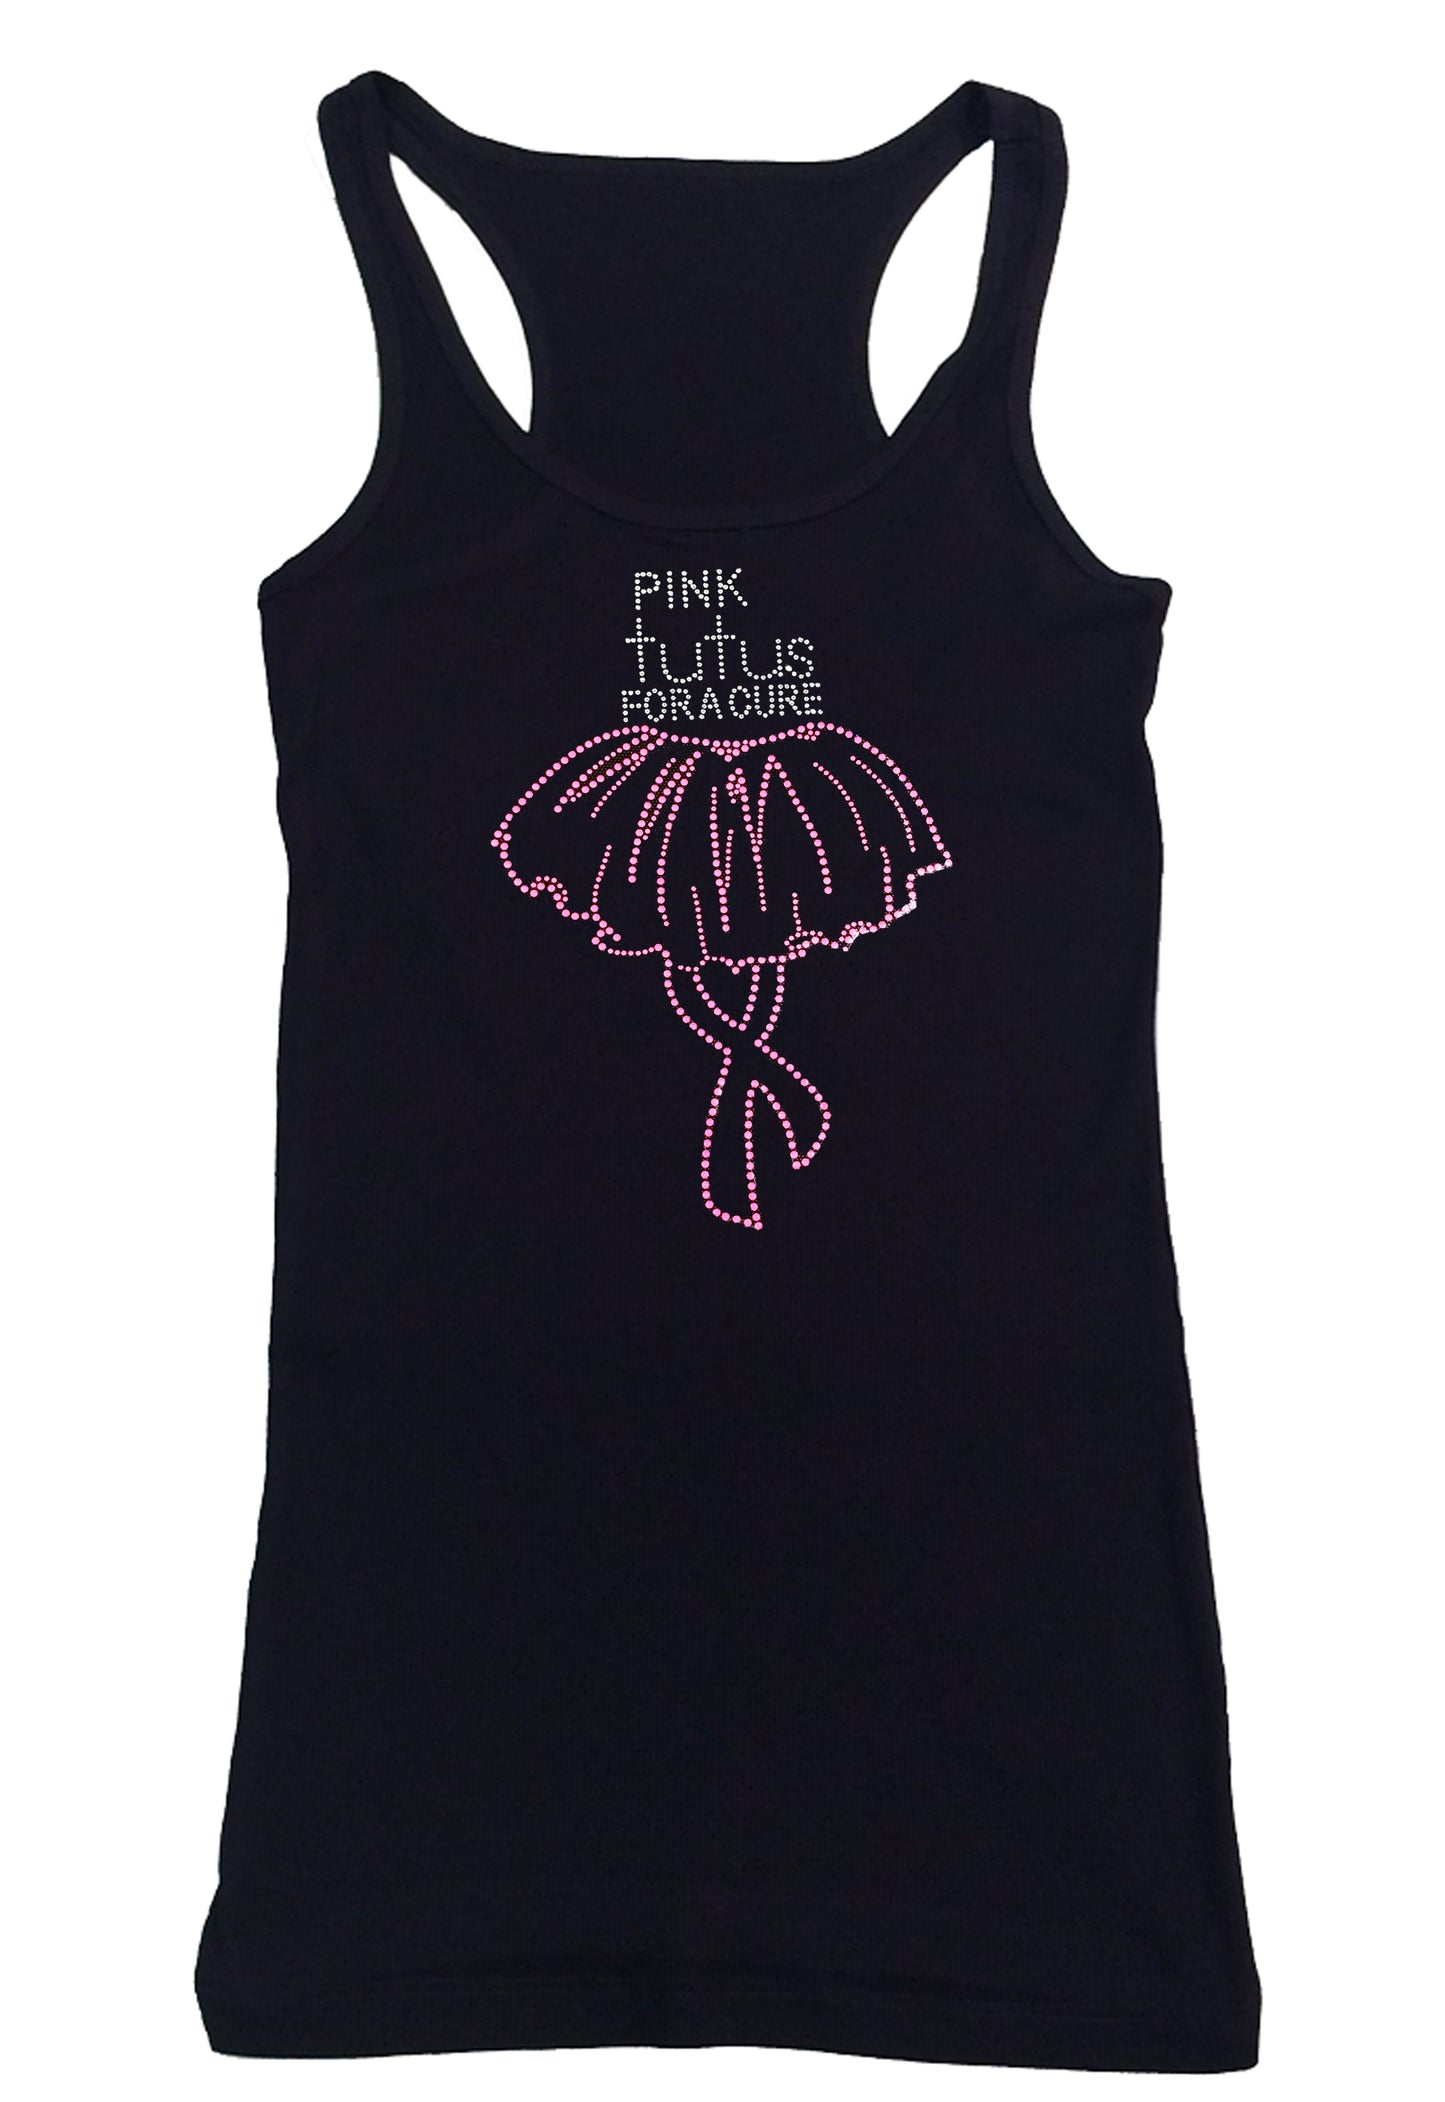 Womens T-shirt with Pink Tutus for a Cure Cancer Awarness in Rhinestones